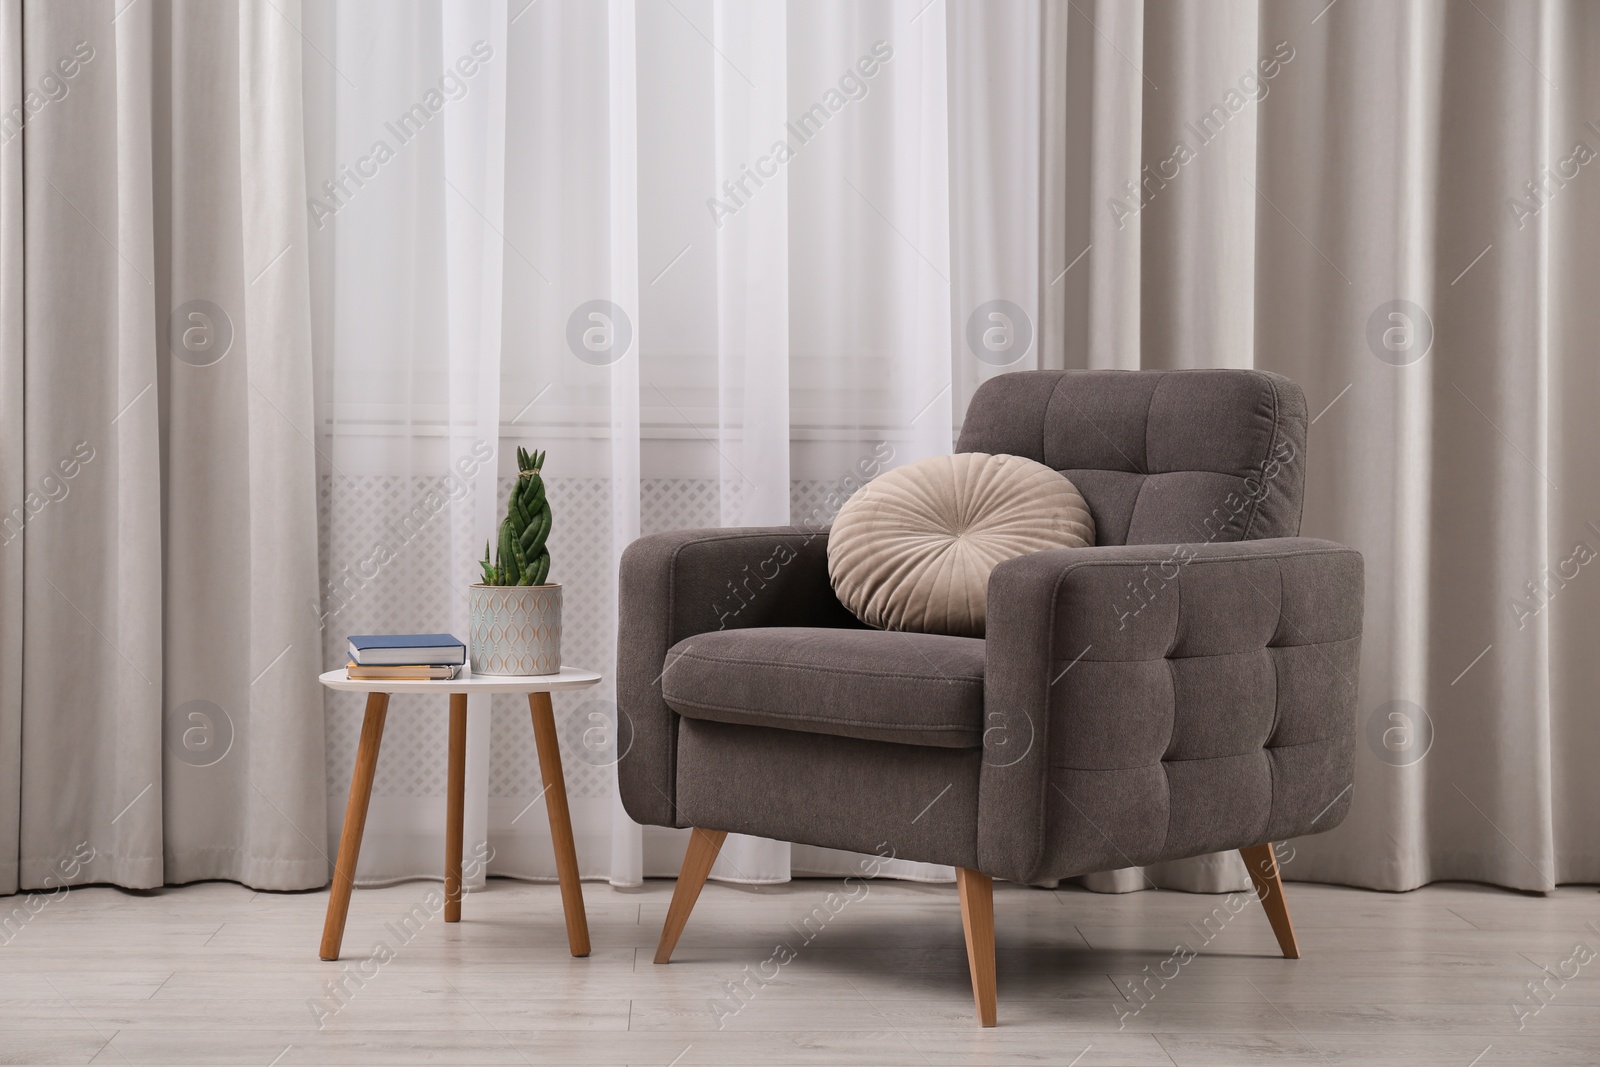 Photo of Comfortable armchair and plant near window in living room. Interior design